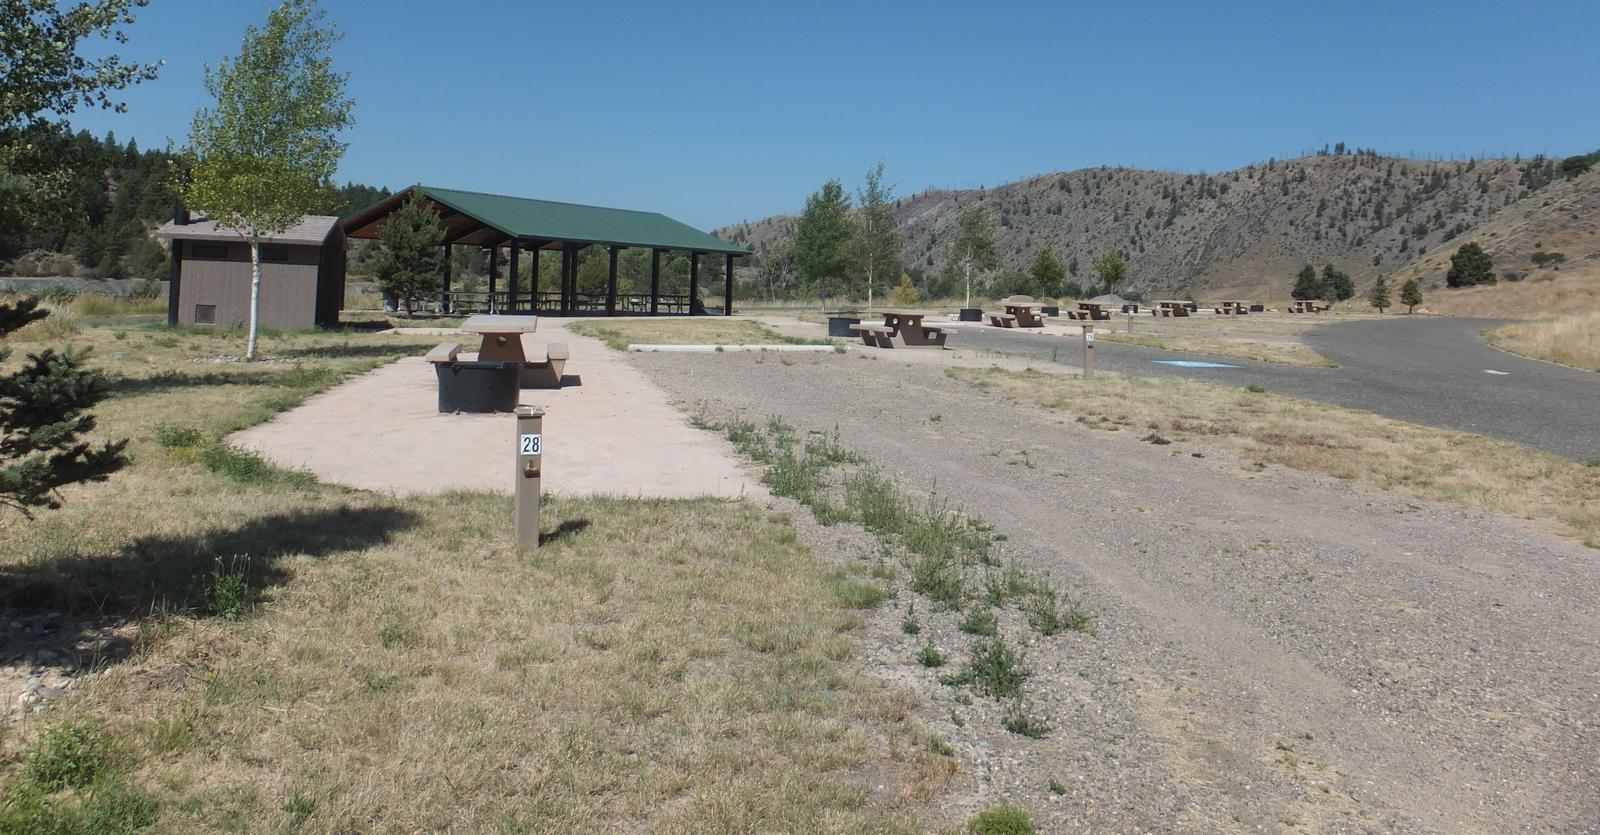 Riverside Campground - Group Use Shelter